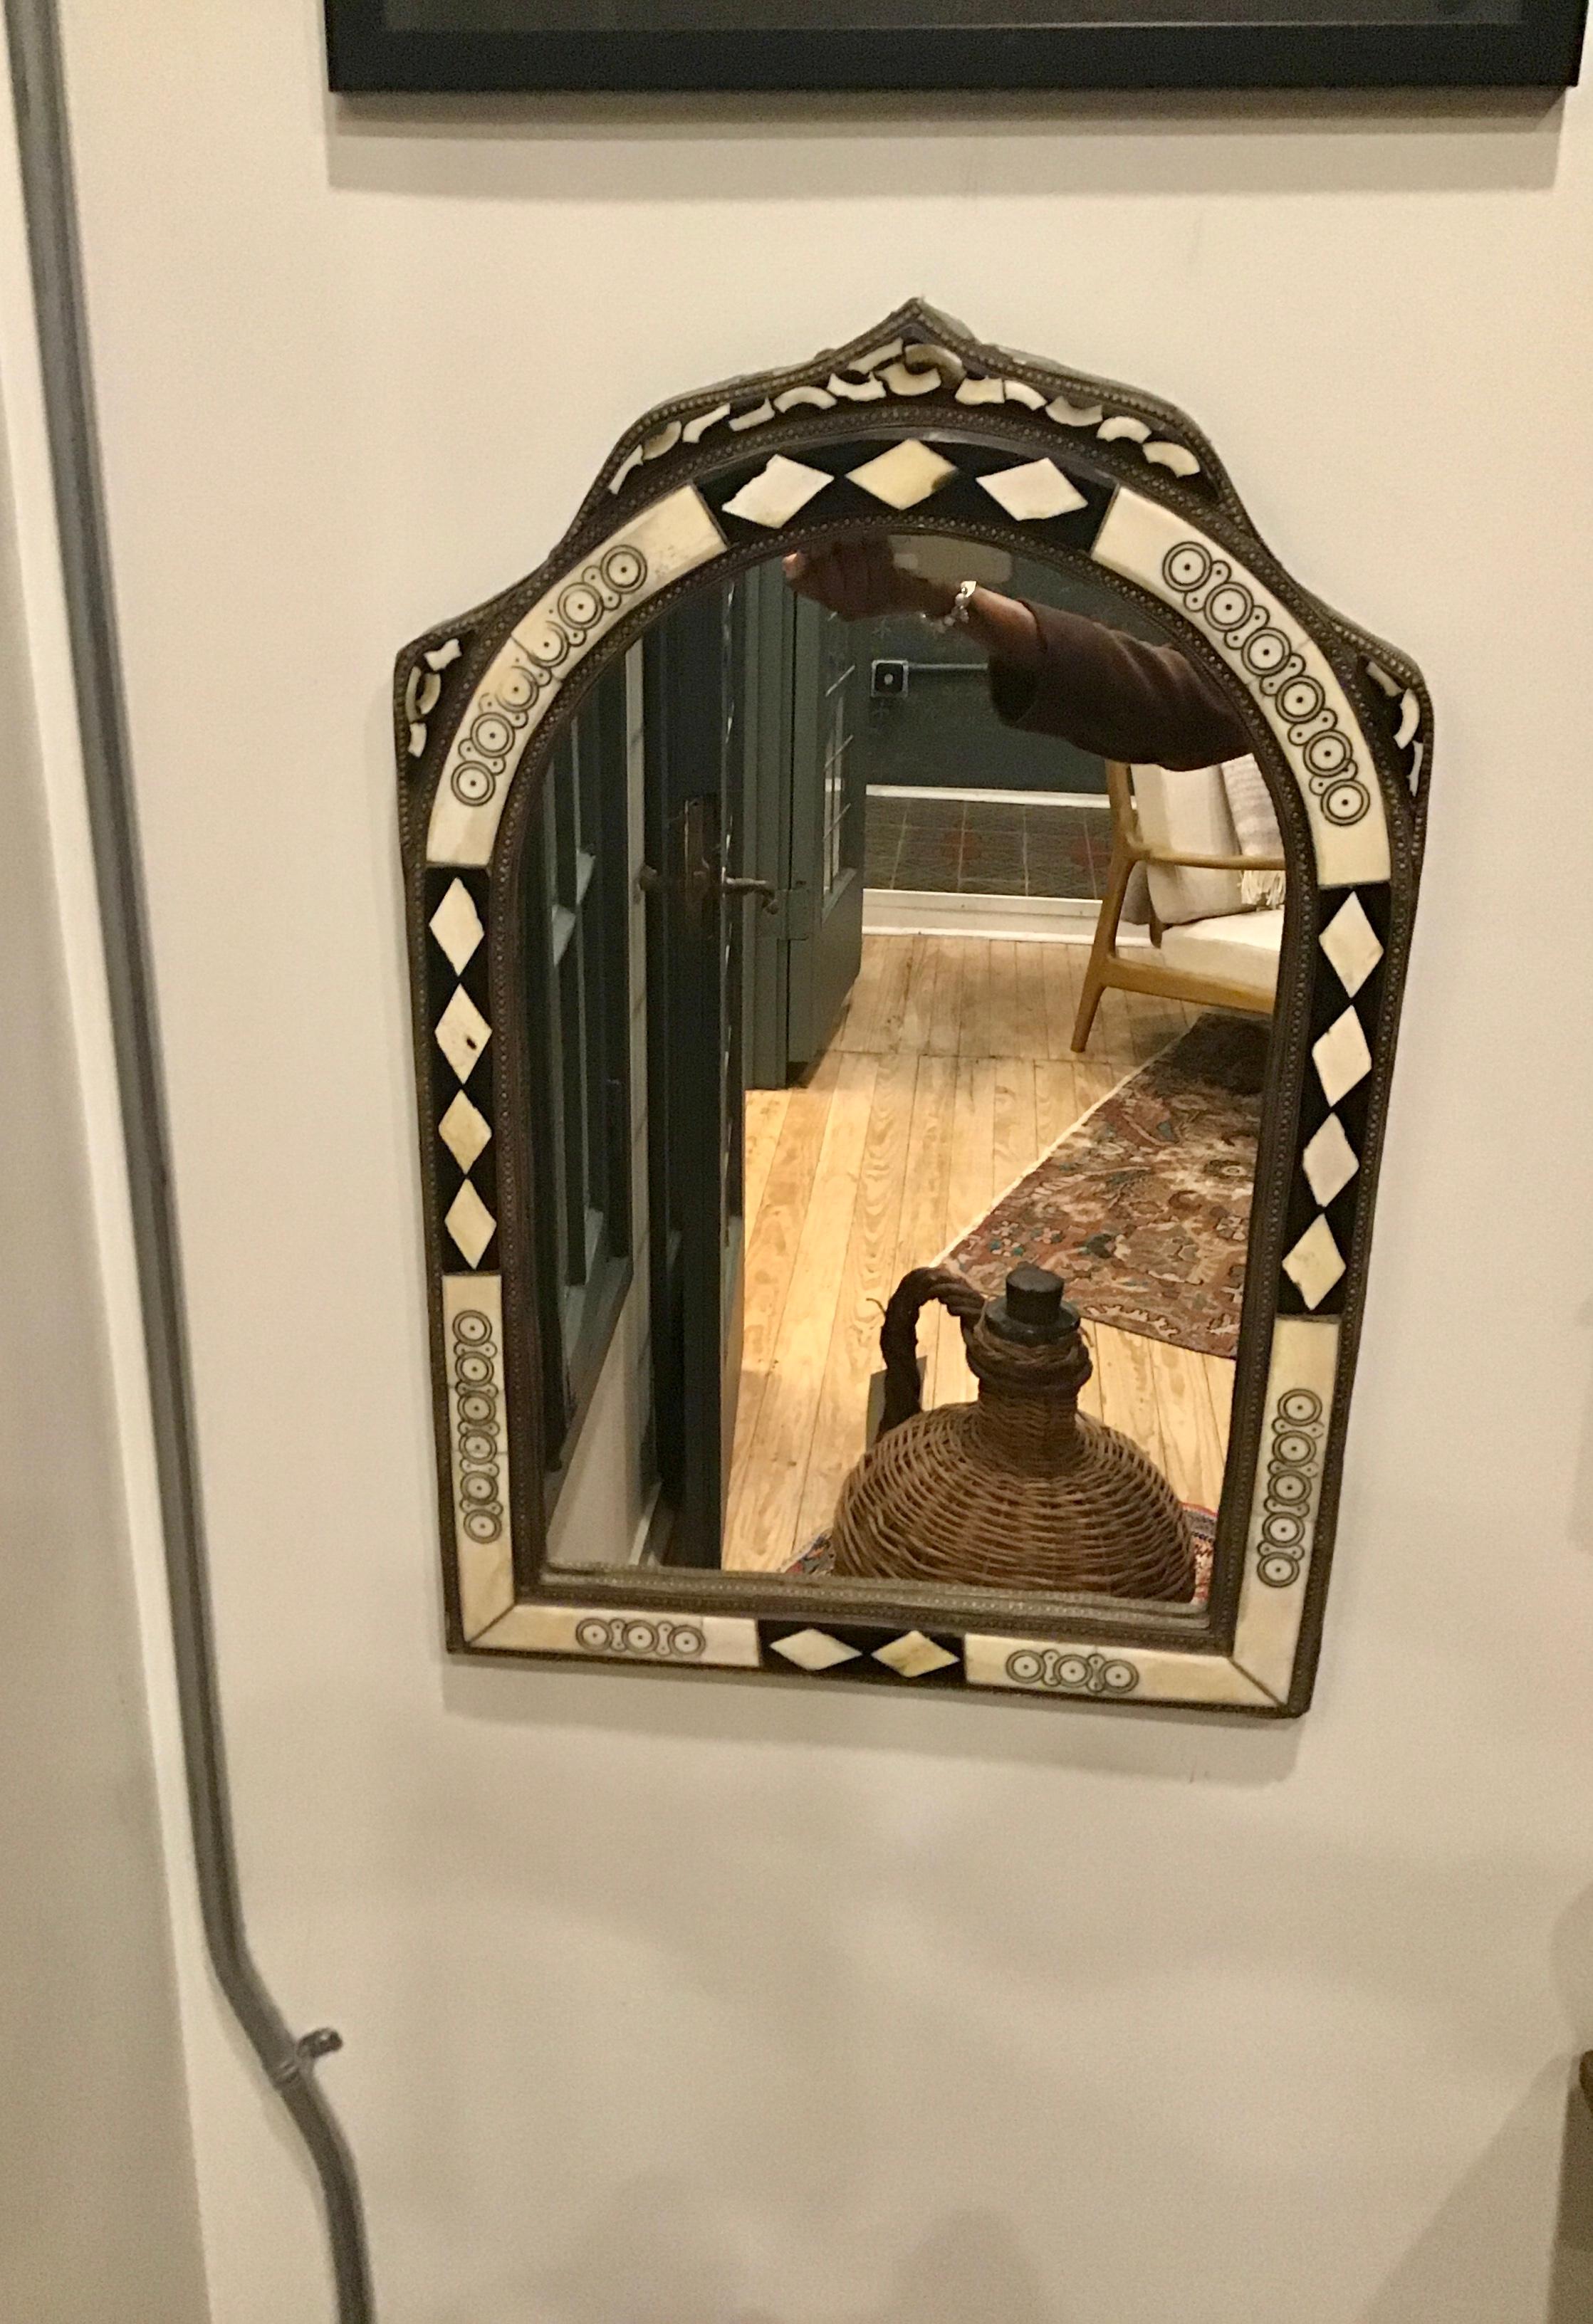 Unique Moroccan bone inlay mirror that adds elegance to any space. This timeless jewel was handcrafted with everlasting appeal which you'll love for years to come.